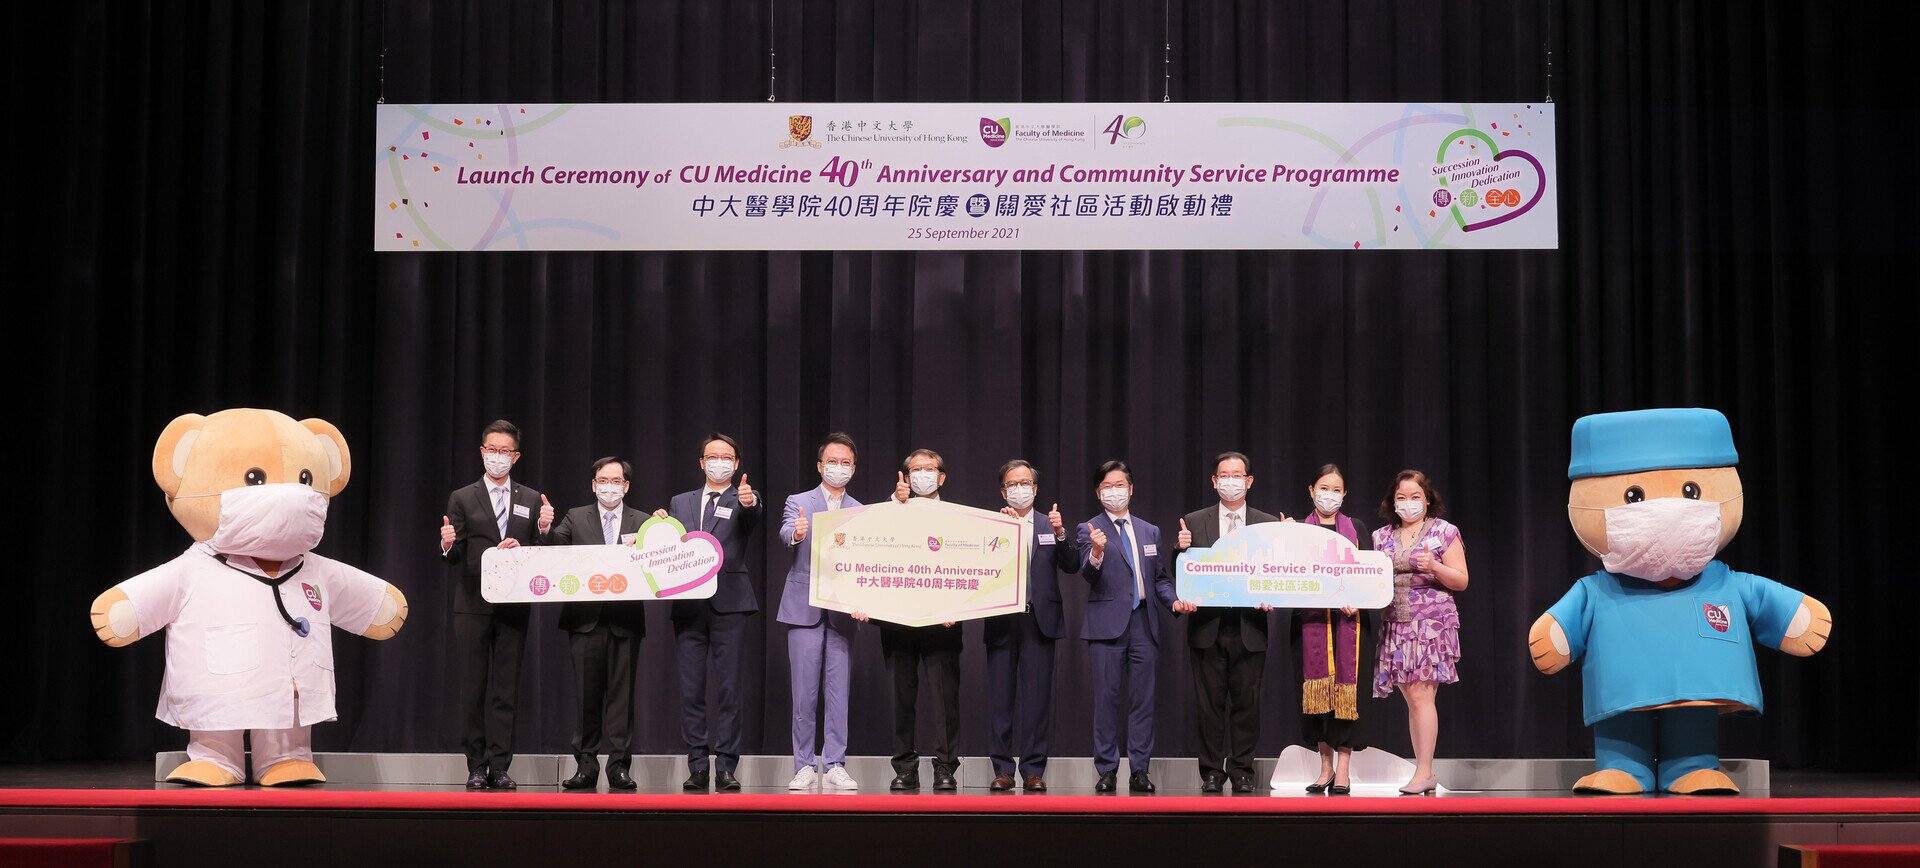 CU Medicine Celebrates its Ruby Jubilee with “Succession, Innovation and Dedication” as Theme 